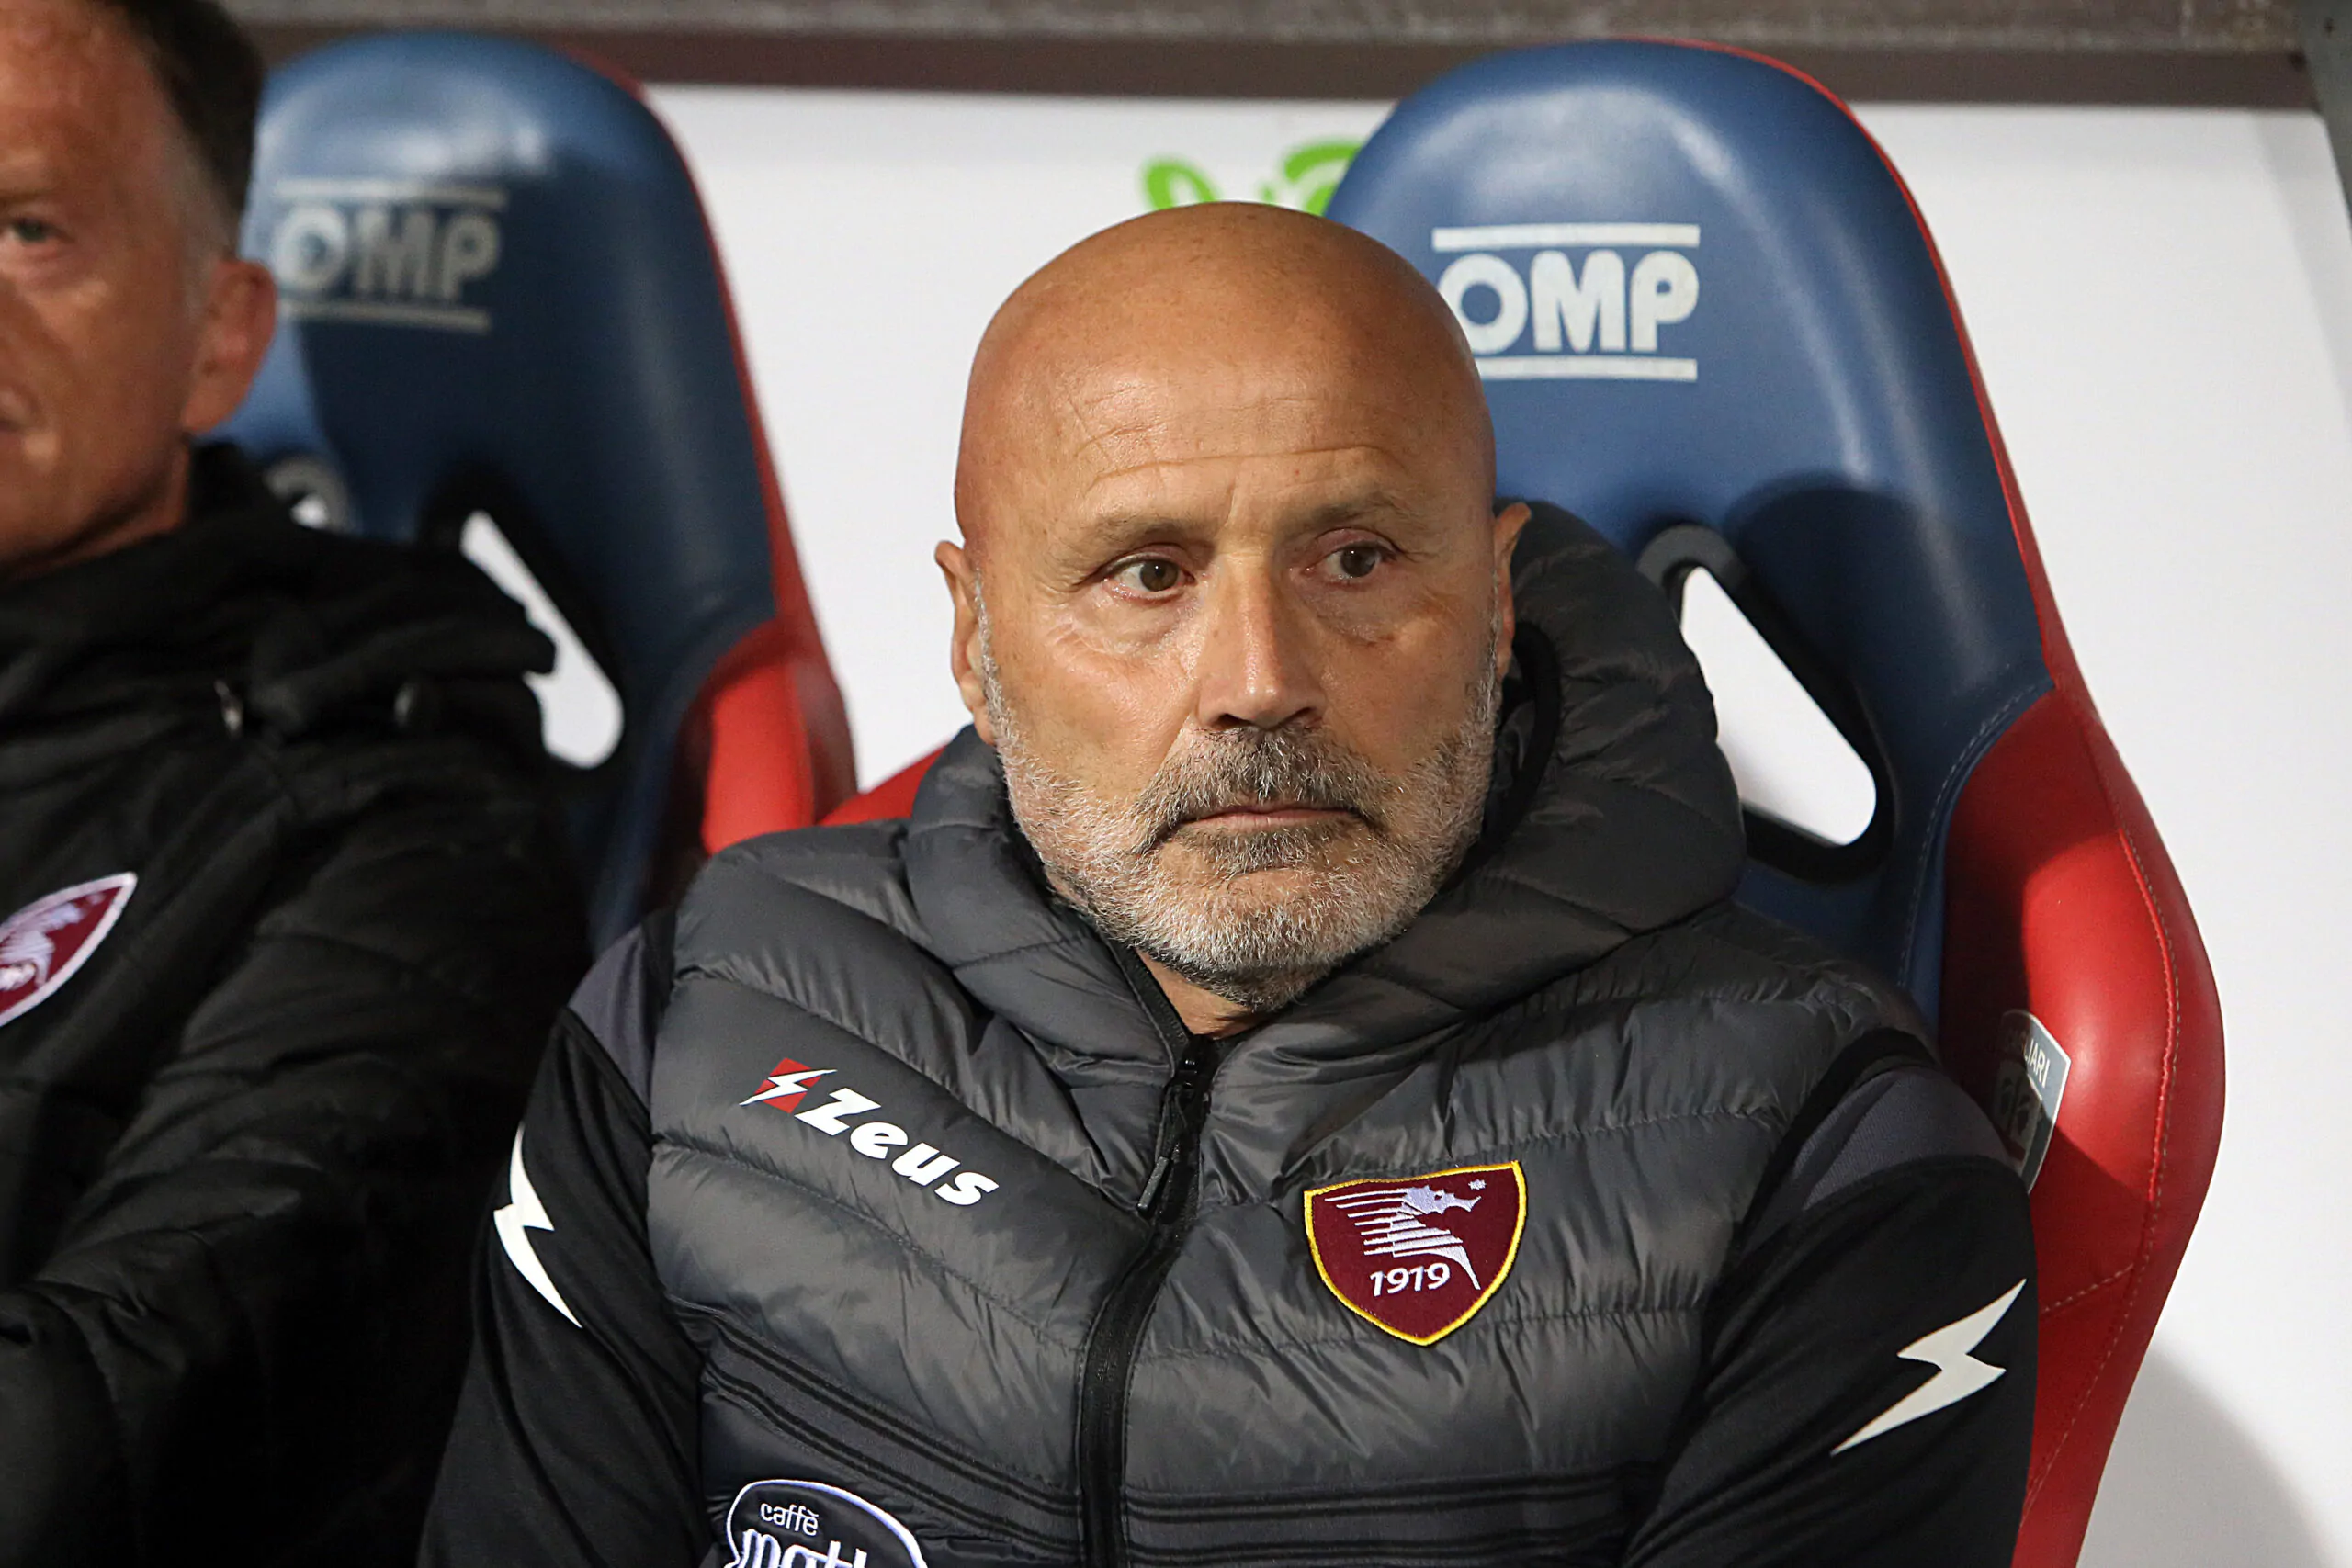 Salernitana have officially opted for another coaching chance, firing Fabio Liverani after just five matches and handing the job to Stefano Colantuono.